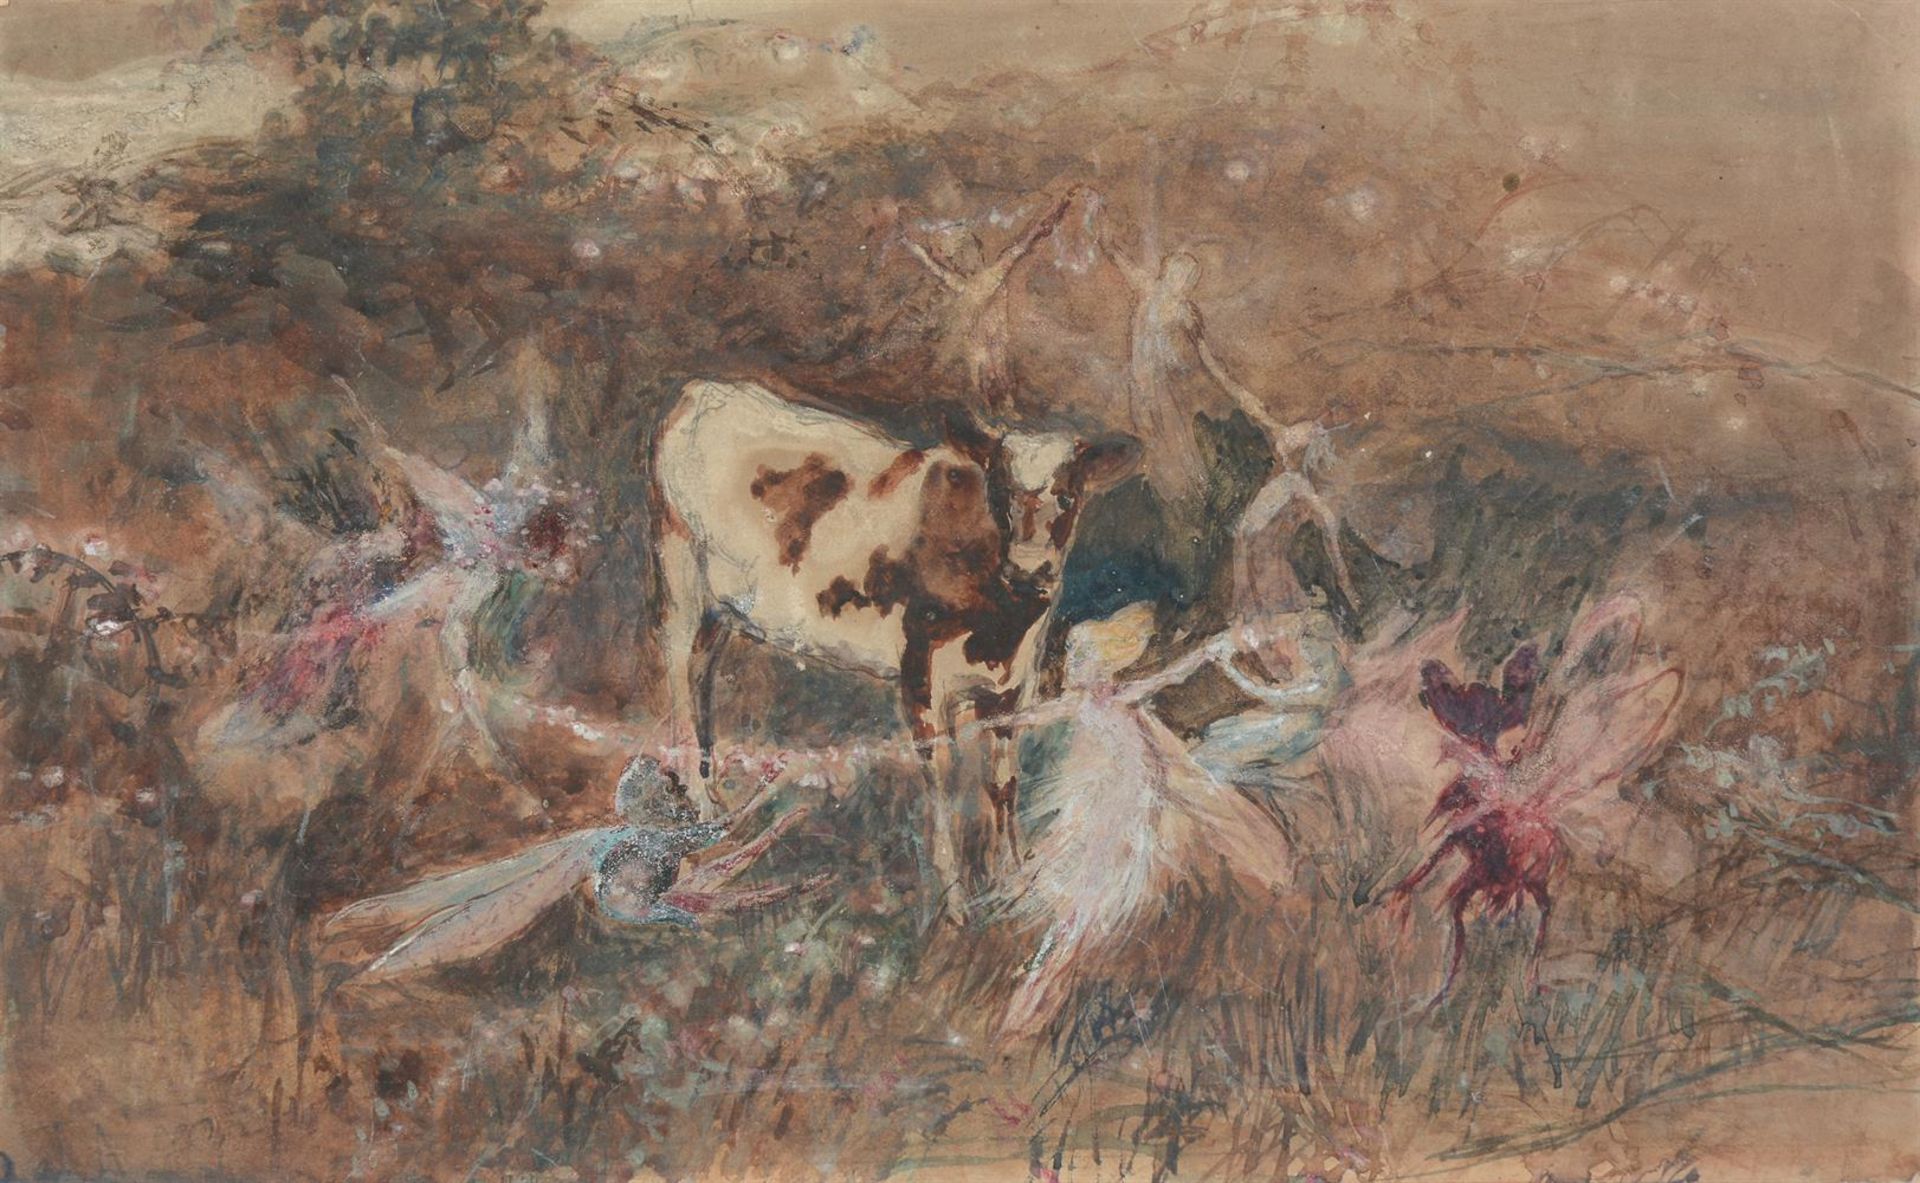 JOHN ANSTER FITZGERALD, FAIRIES PLAYING WITH A HORSE / FAIRIES PLAYING WITH A COW / A BIRD BY A NEST - Image 2 of 4